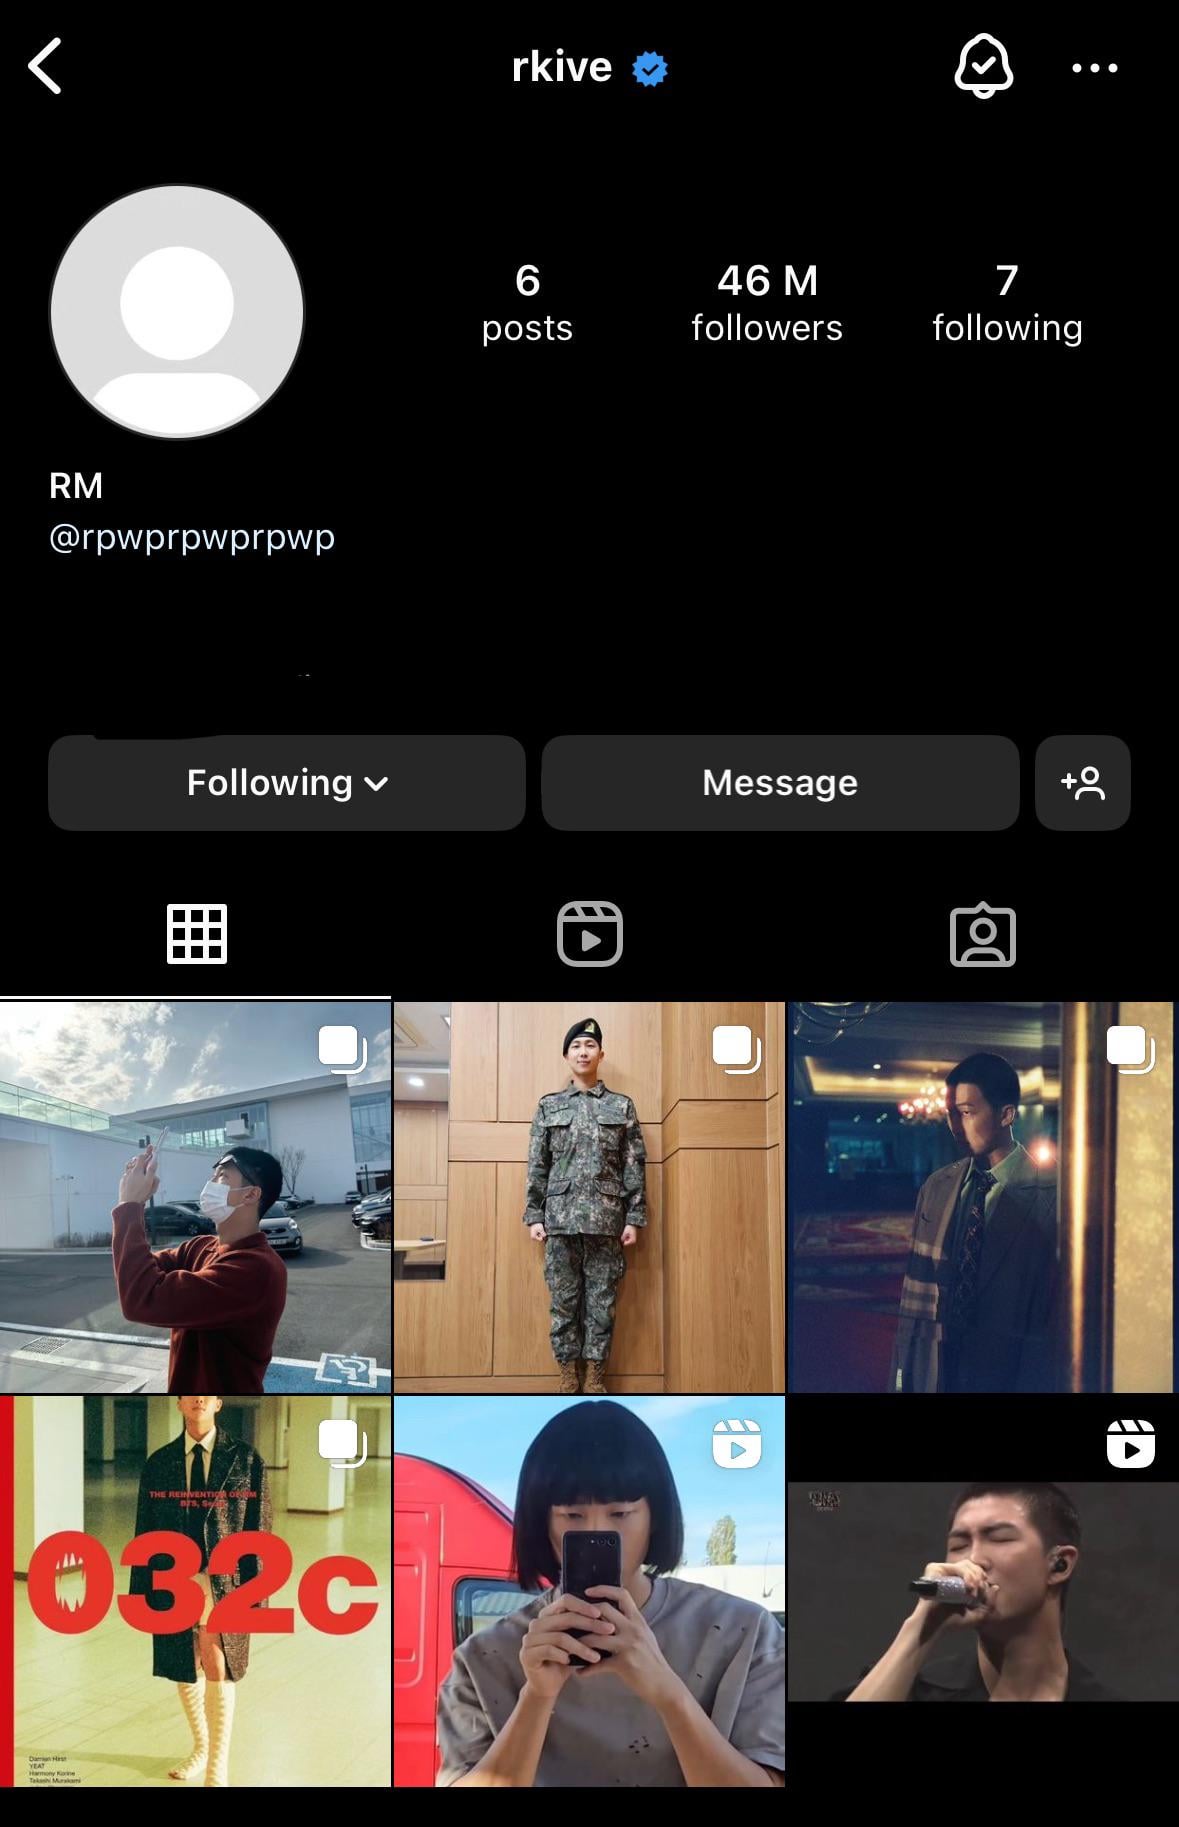 240413 RM deleted 1 post from his Instagram account